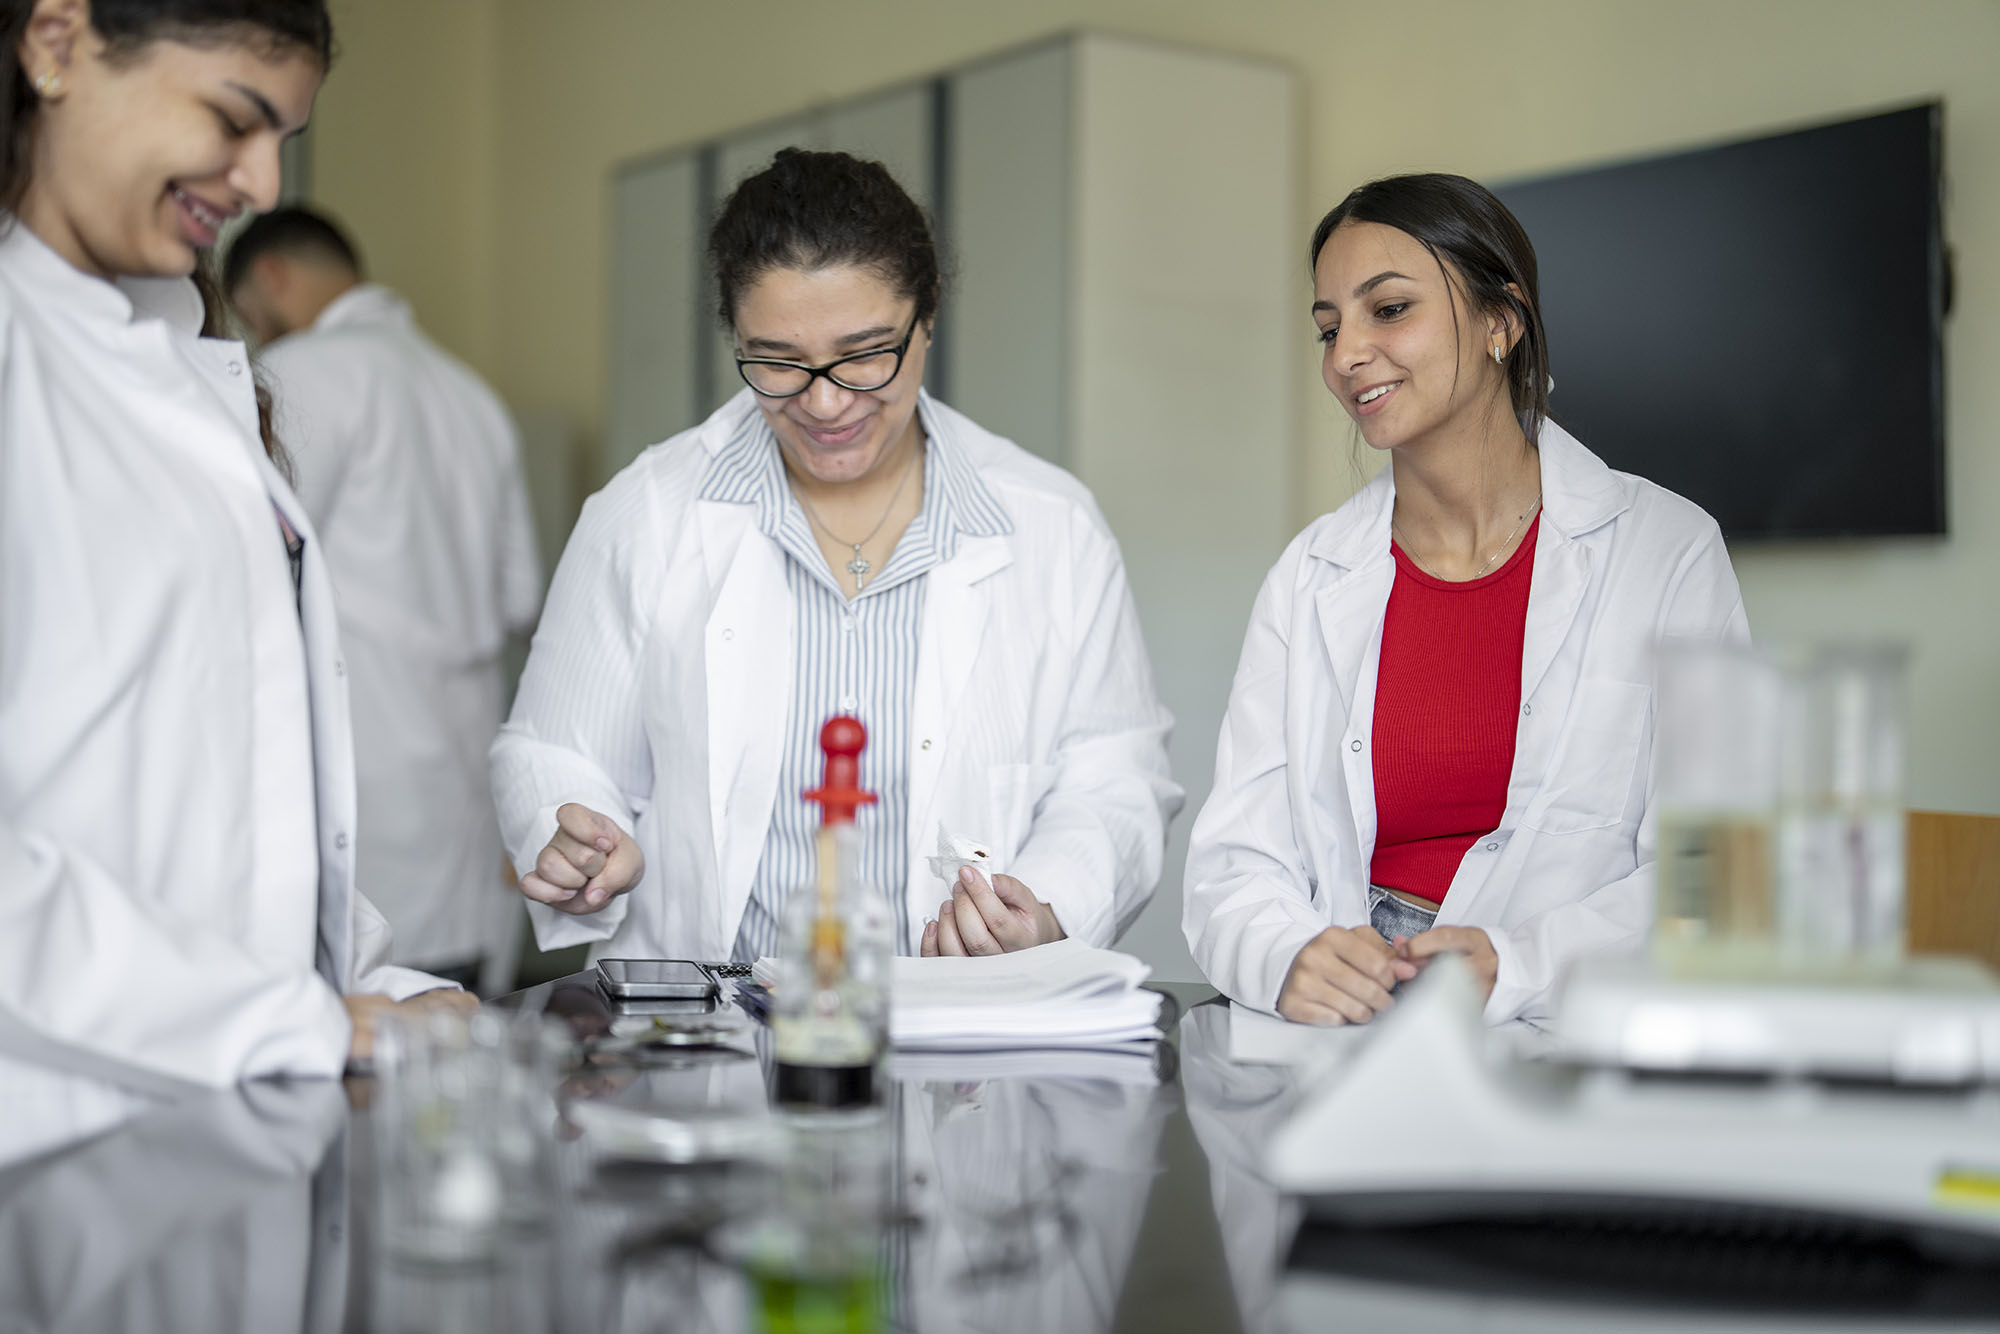 biology program image of group of  female students in white coats working with science equipment 